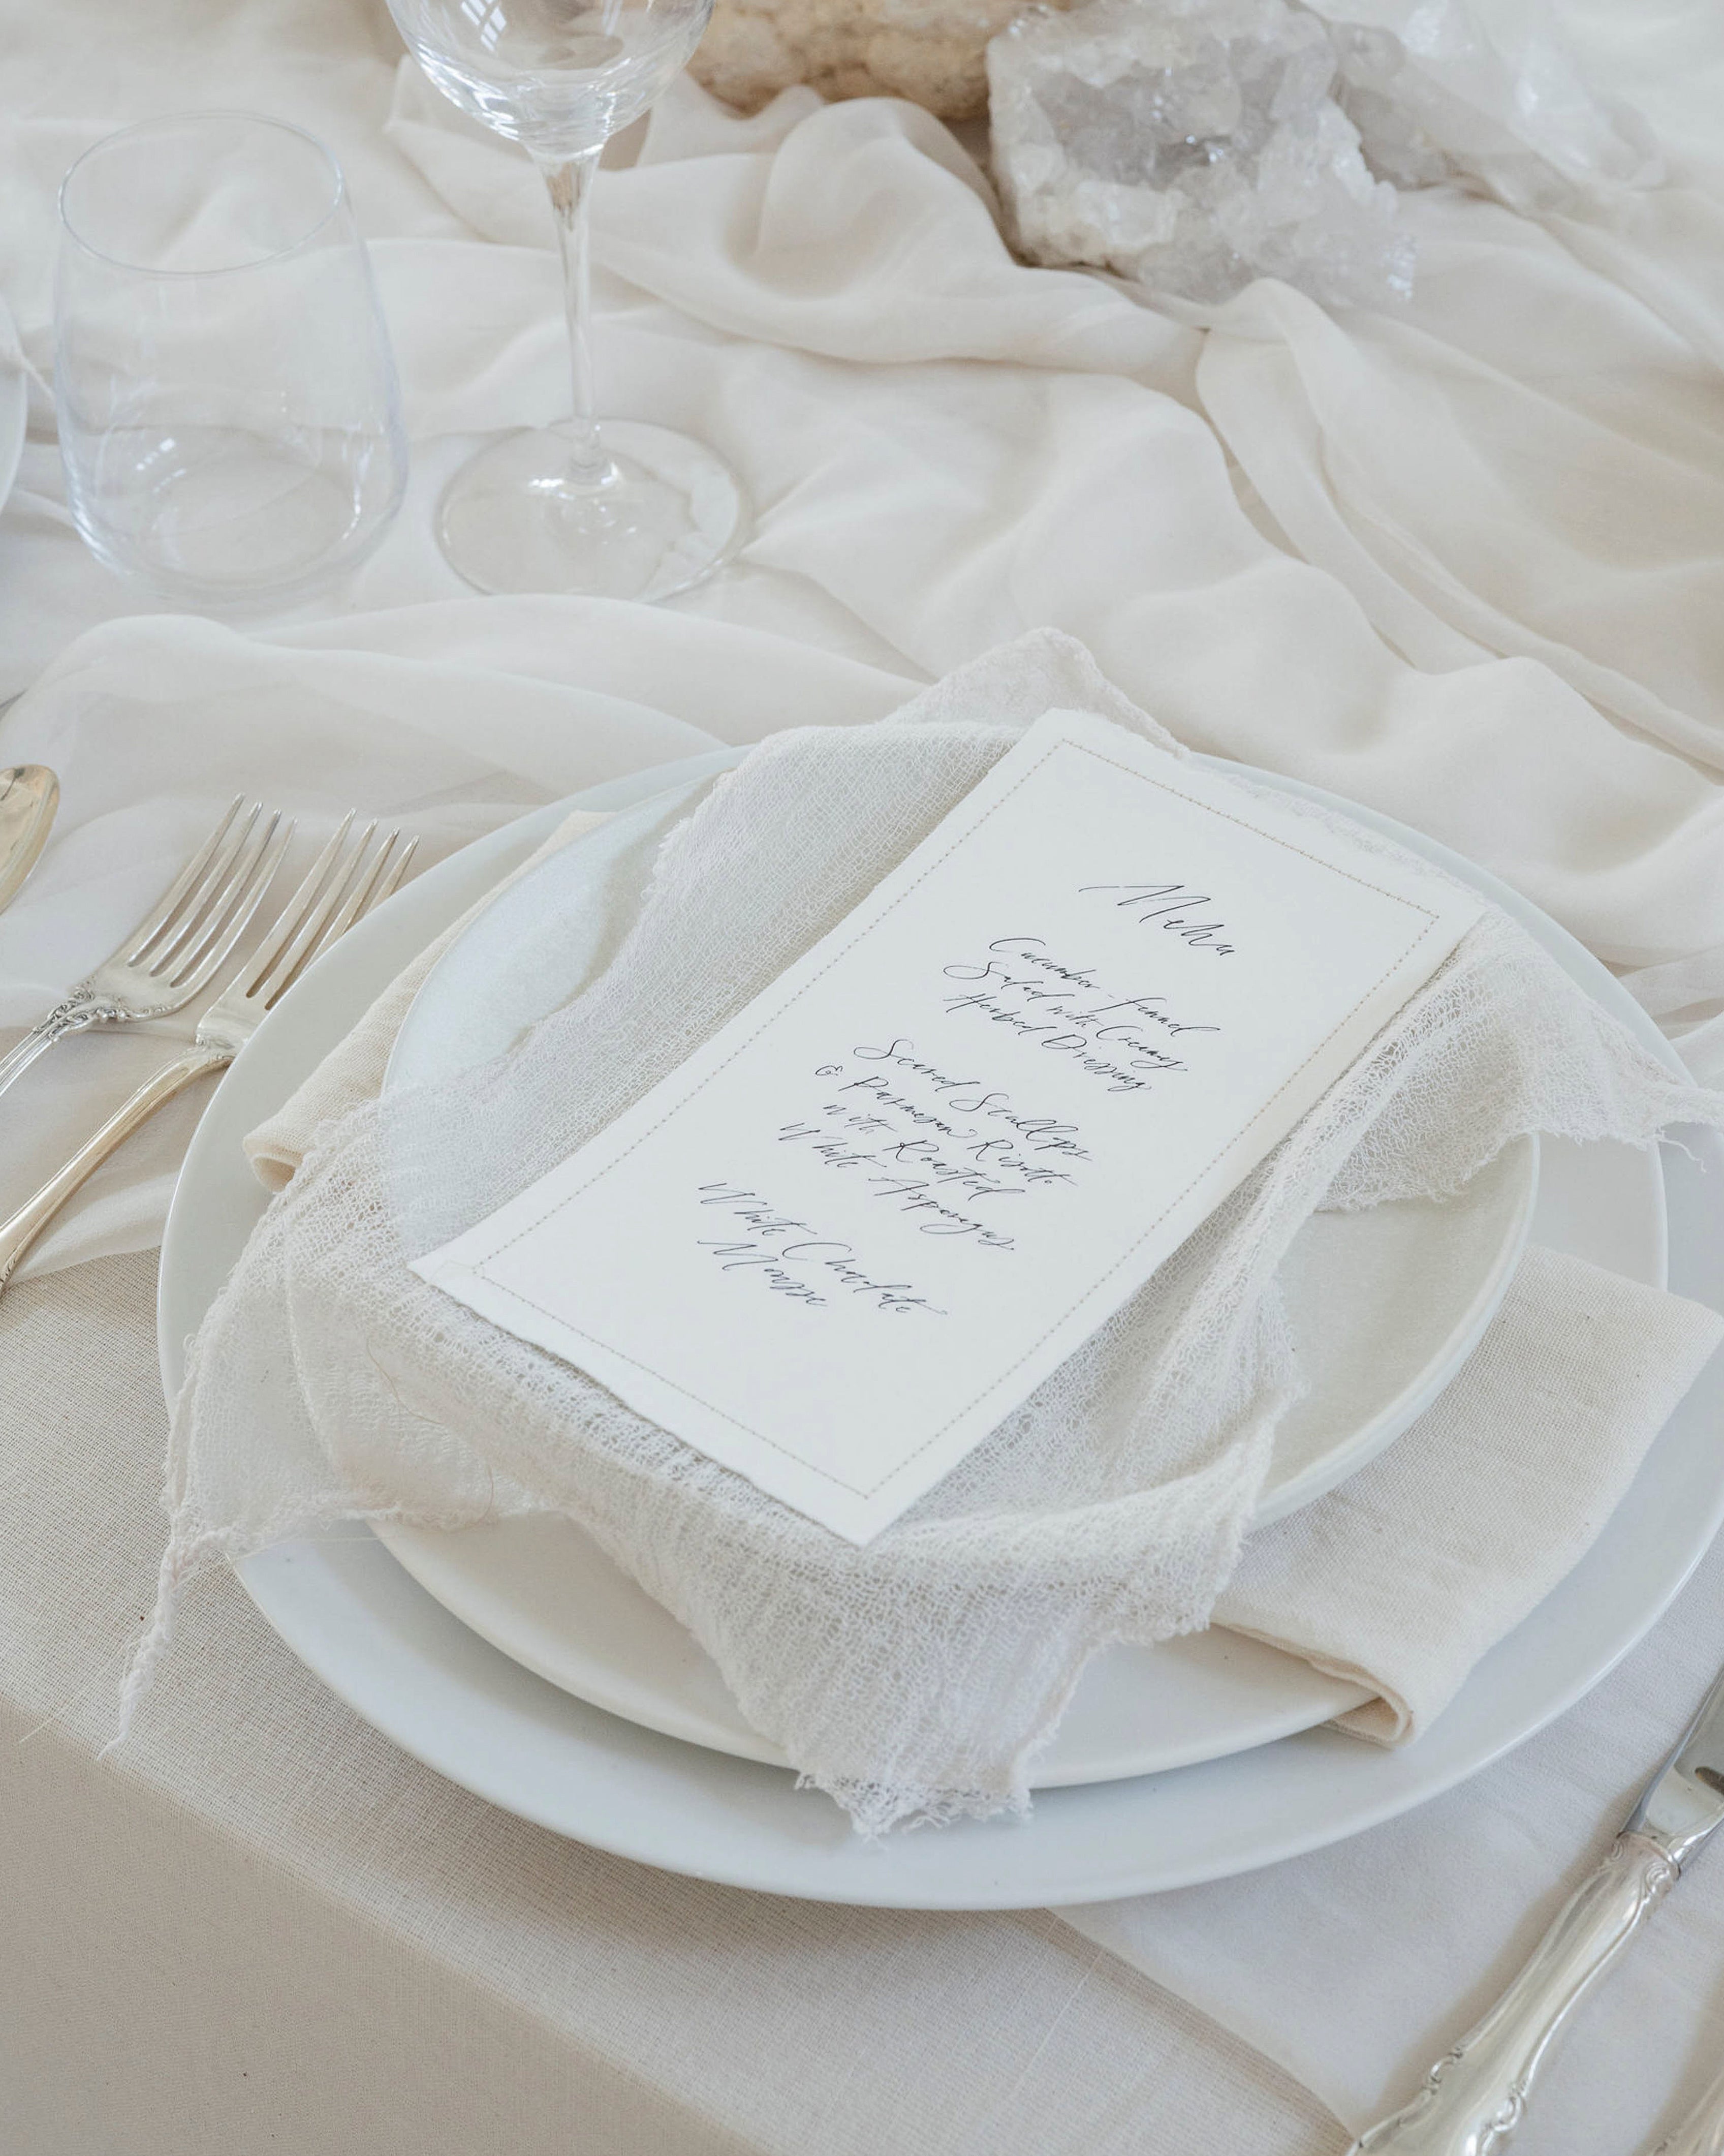 bespoke table setting with silk and willow handmade menus and napkins